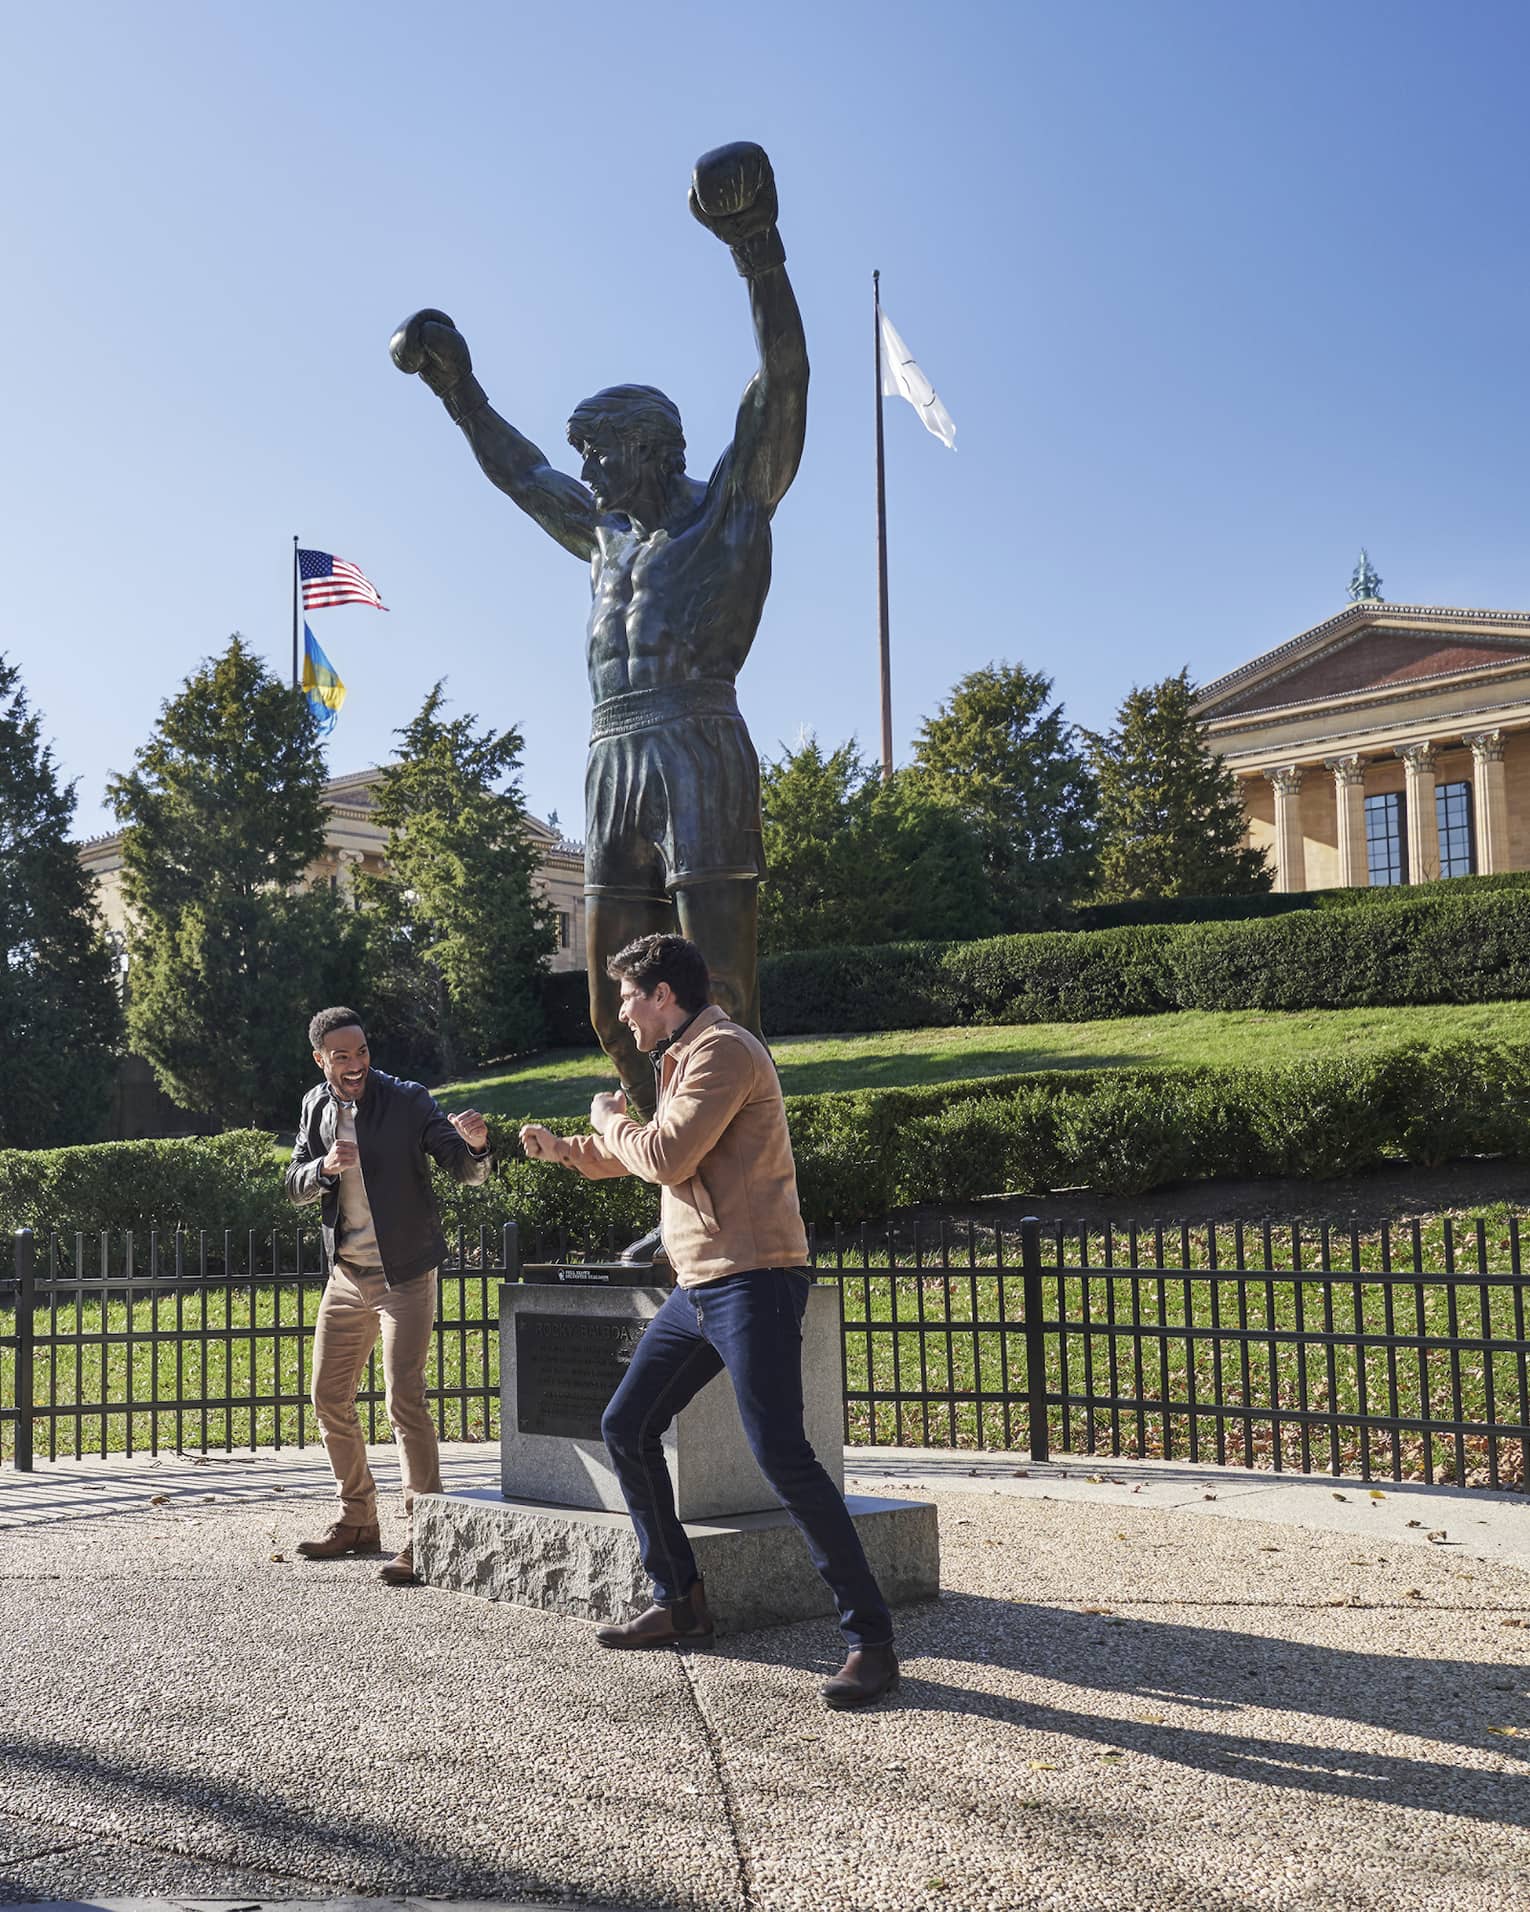 Two people pretend to box in front of the Rocky statue against a bright blue sky; another takes their photo, laughing.